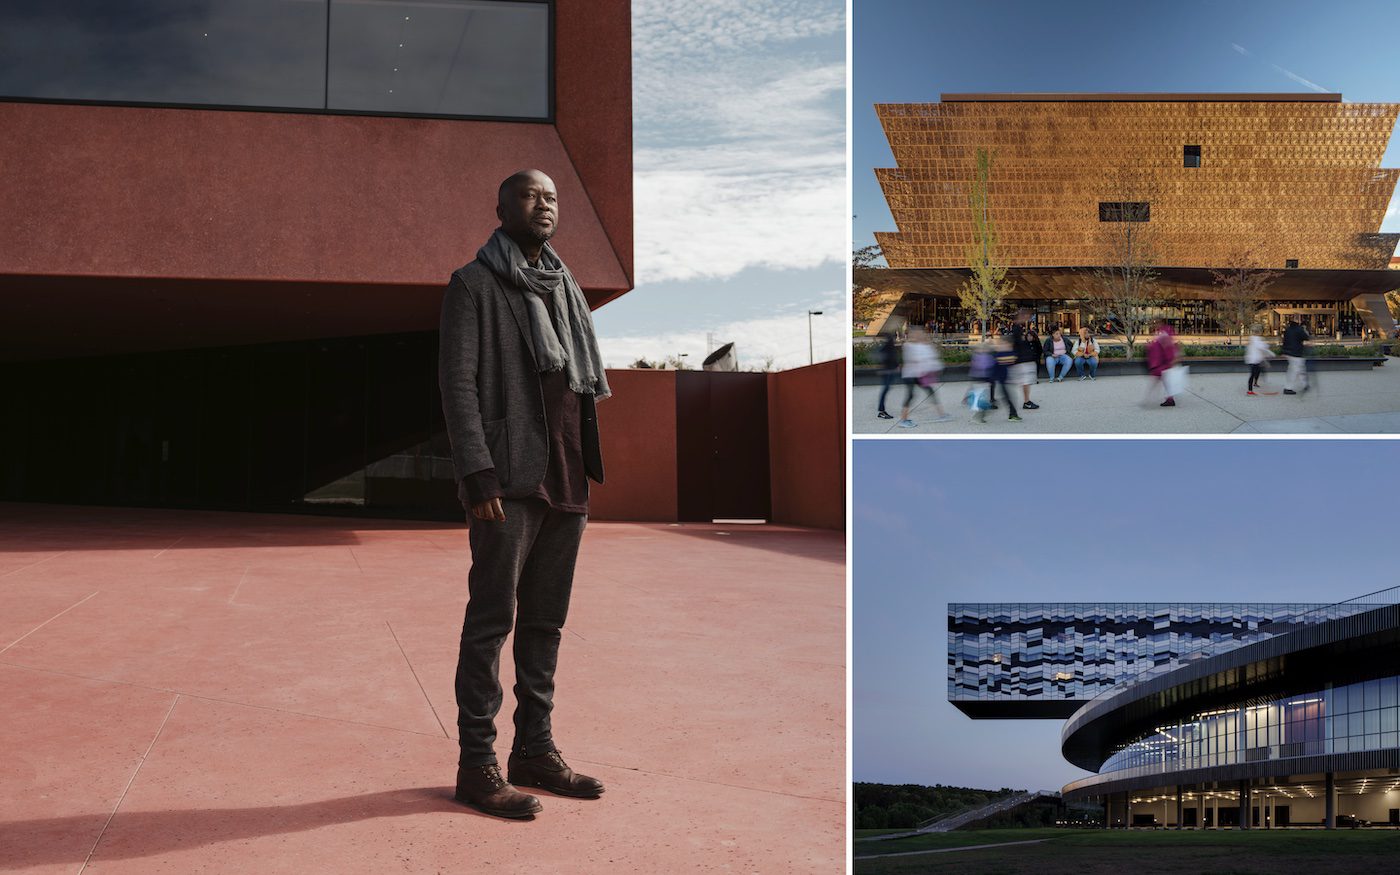 David Adjaye. Photo credit: Josh Huskin; two buildings designed by David Adjaye (top right) Smithsonian National Museum of African American Arts and Culture - Washington DC. Photo: Nic Lehoux; (bottom right) MOSCOW School of Management. Photo: Ed Reeve. All images courtesy of RIBA.